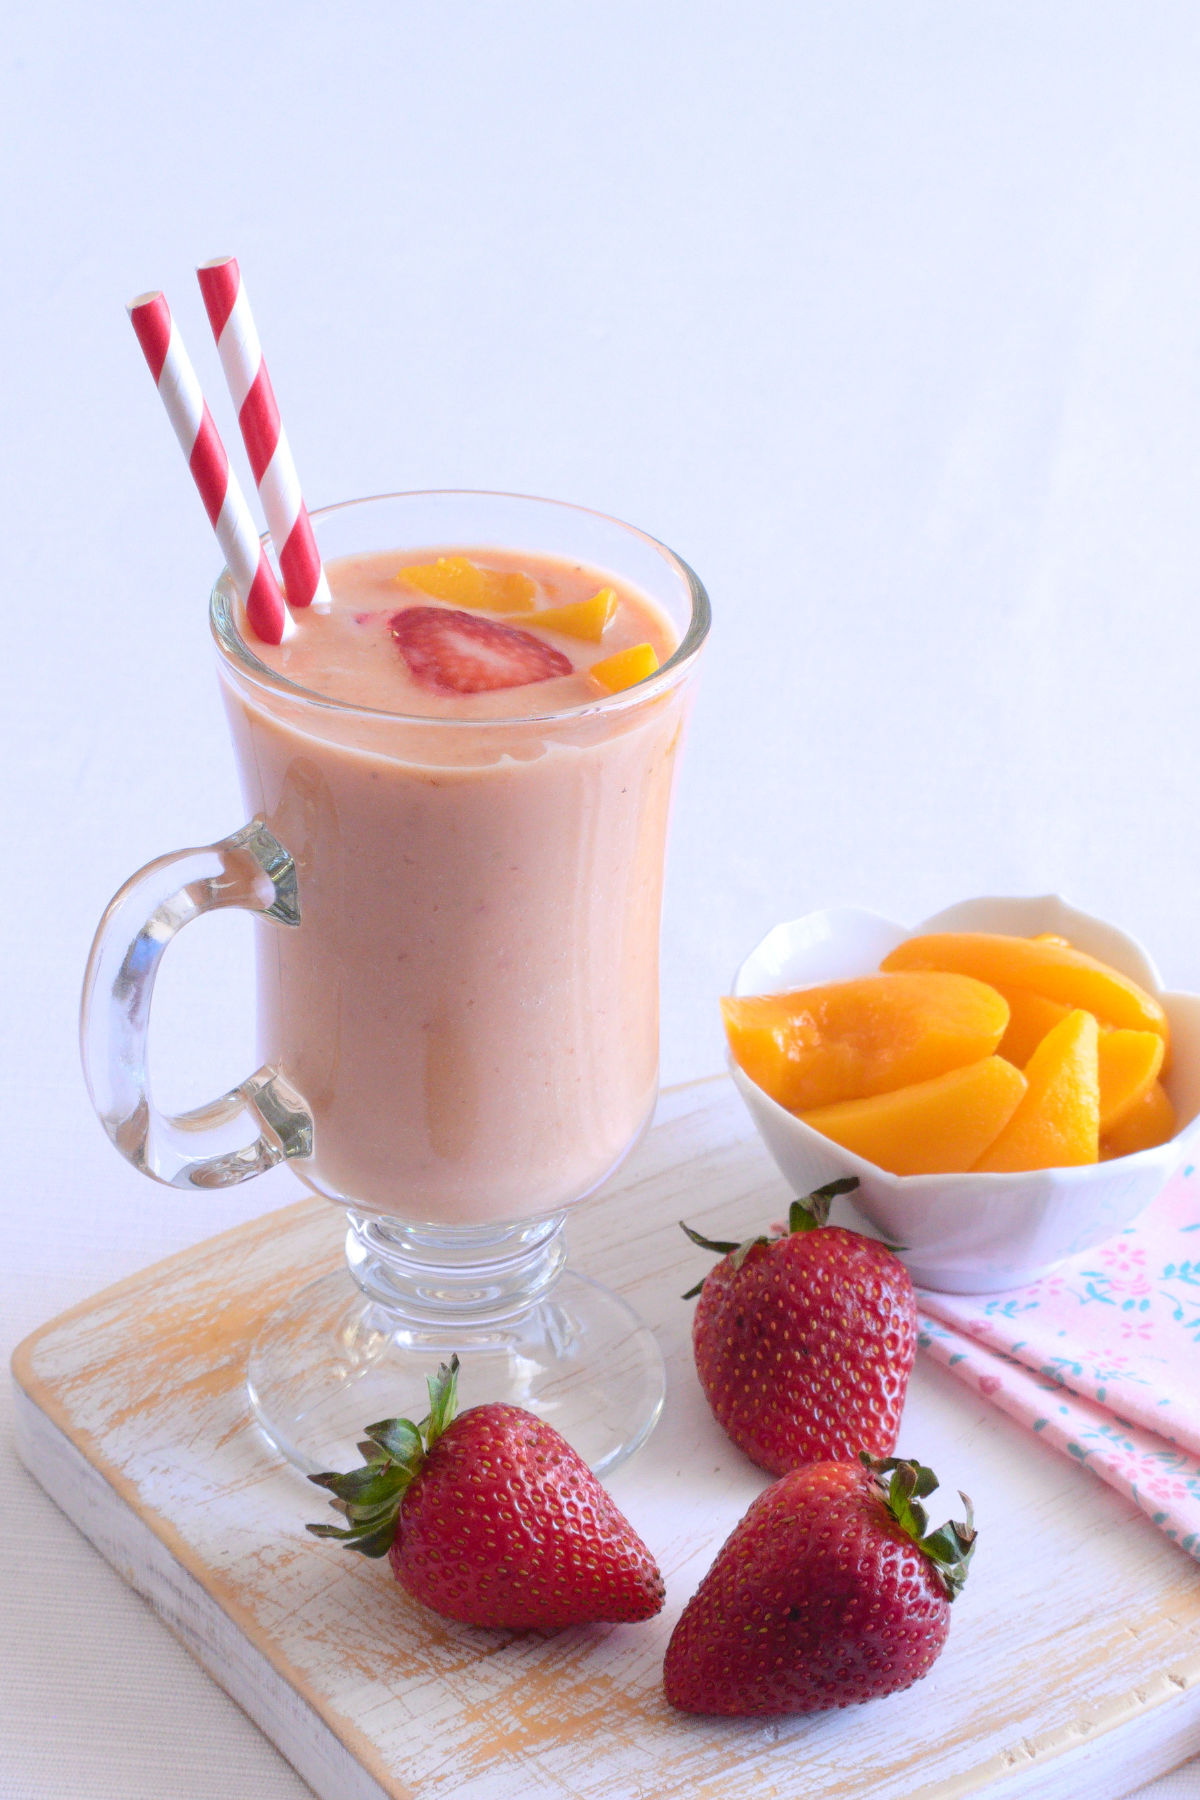 Strawberry peach smoothie in a glass with straws and fresh strawberries in the foreground.